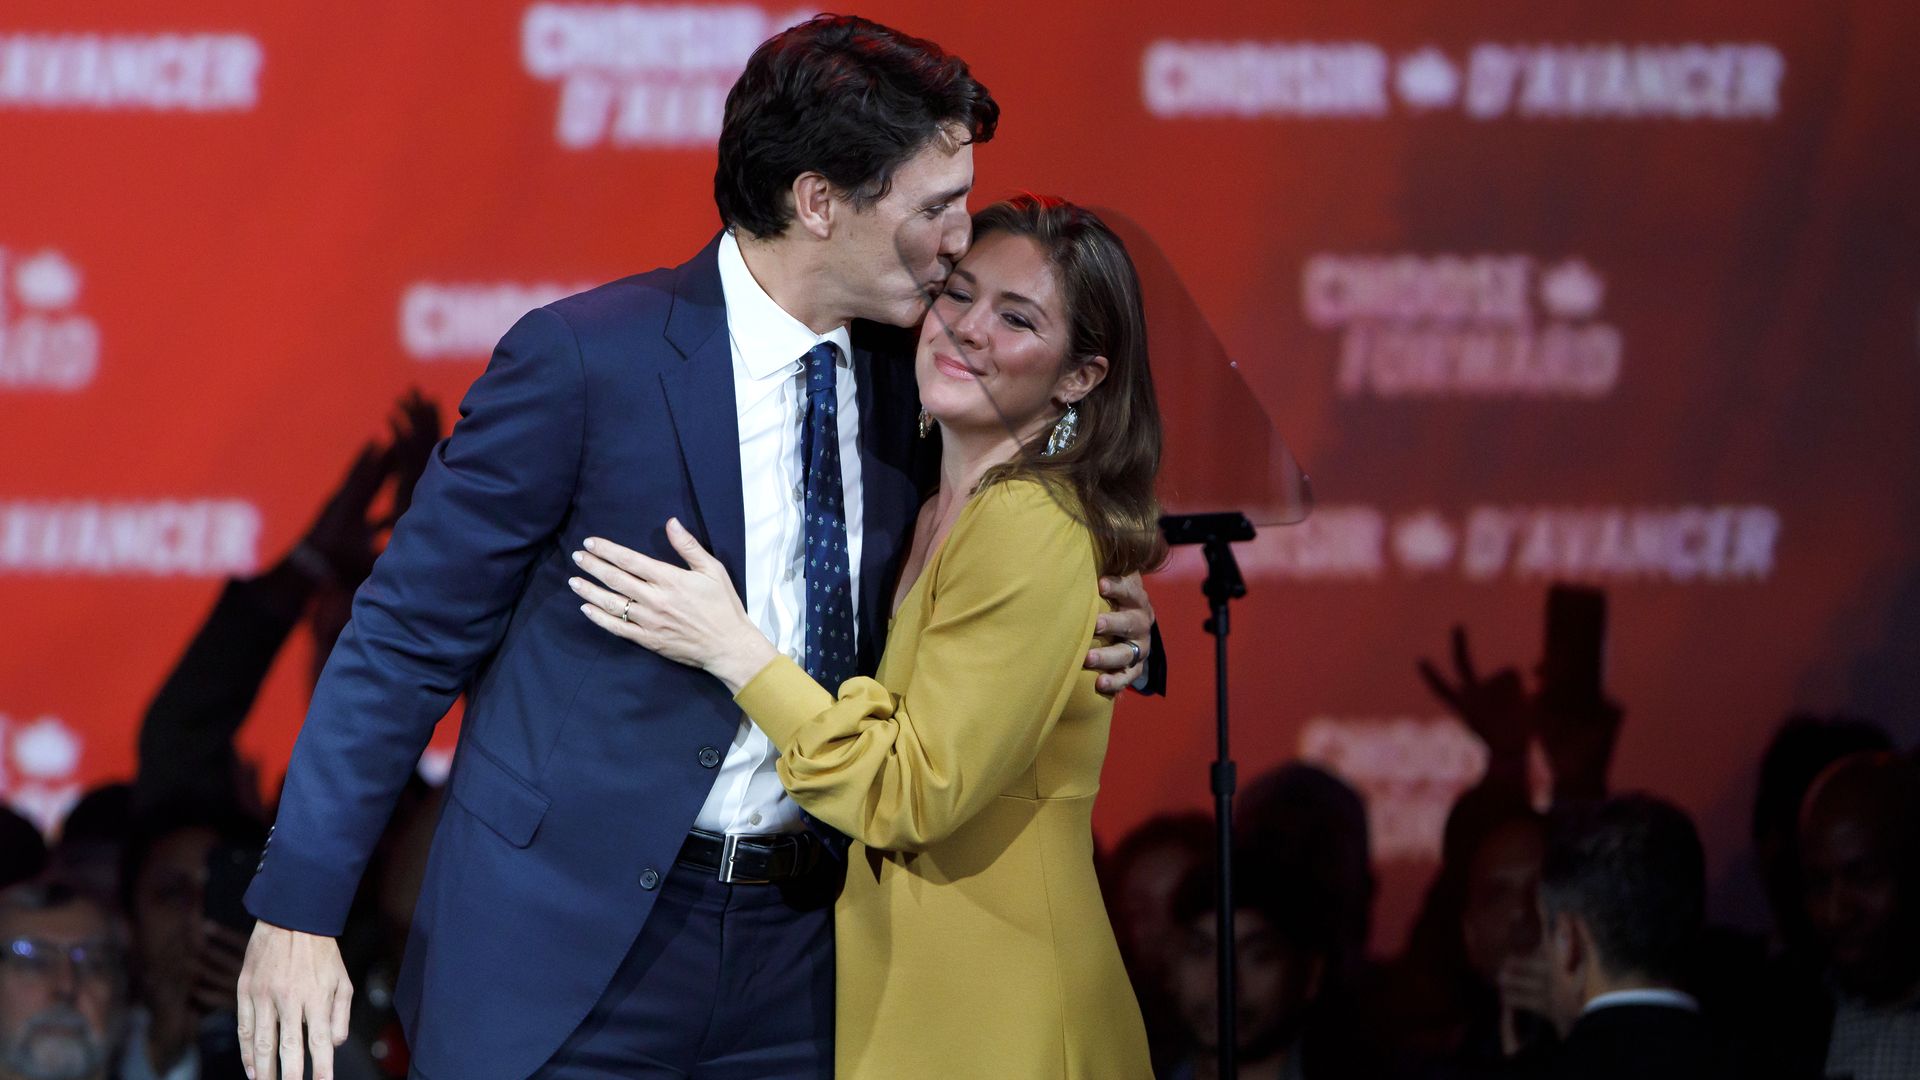 In this image, Trudeau and his wife stand and embrace